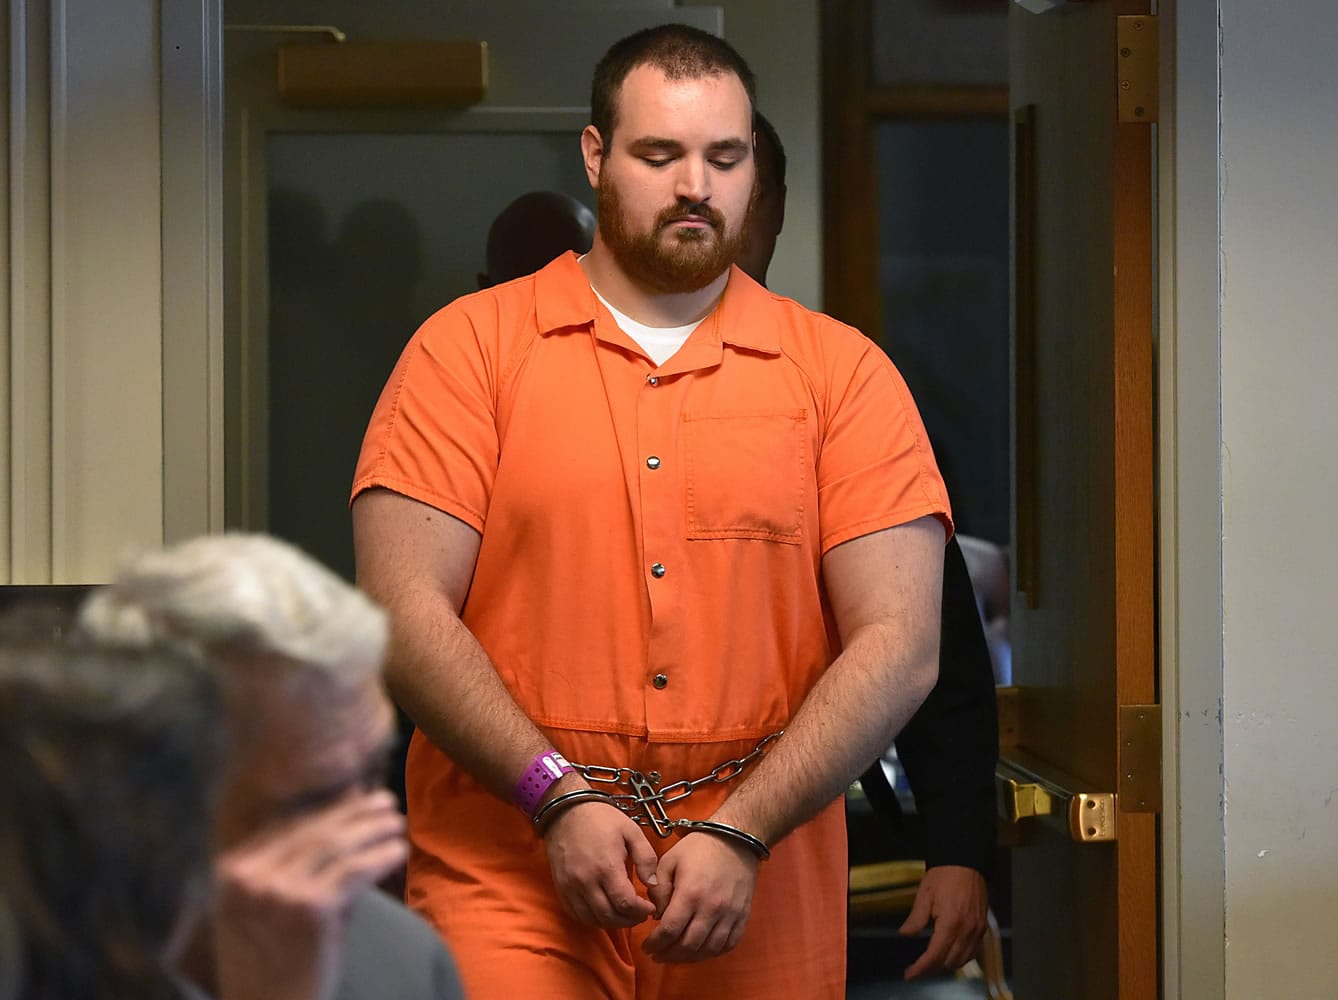 Daniel Irwin is led into the courtroom at the Oneida County Courthouse during an indictment hearing in Utica, N.Y. on Wednesday. Several members including Irwin of an insular upstate New York church have pleaded not guilty to being part of a group that beat a young man to death and injured his younger brother.